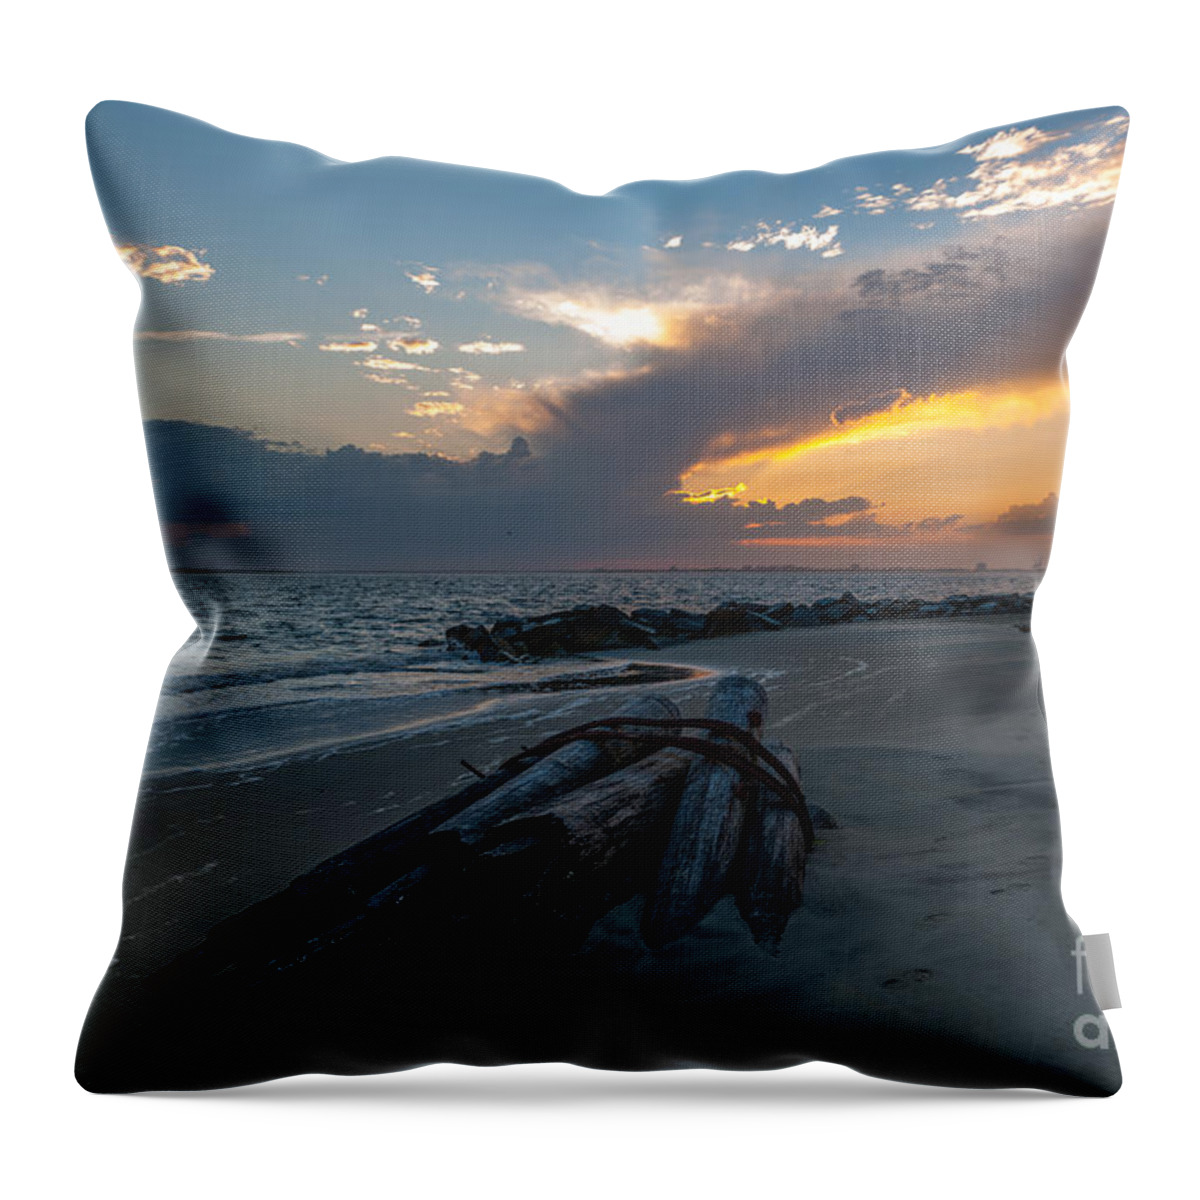 Washed Ahore Throw Pillow featuring the photograph Washed Ashore by Dale Powell